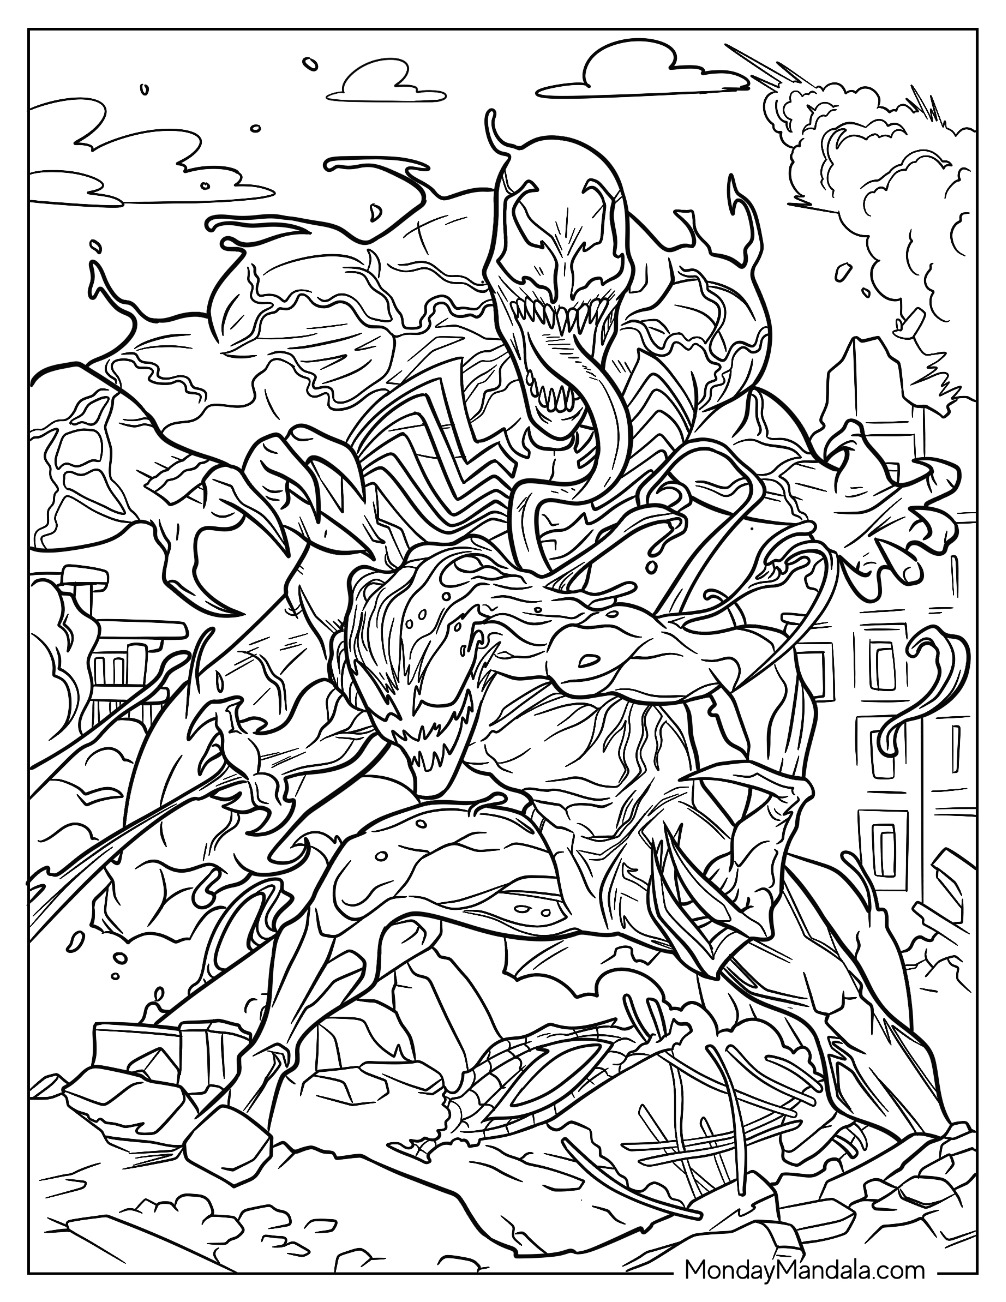 Carnage coloring pages free pdf printables